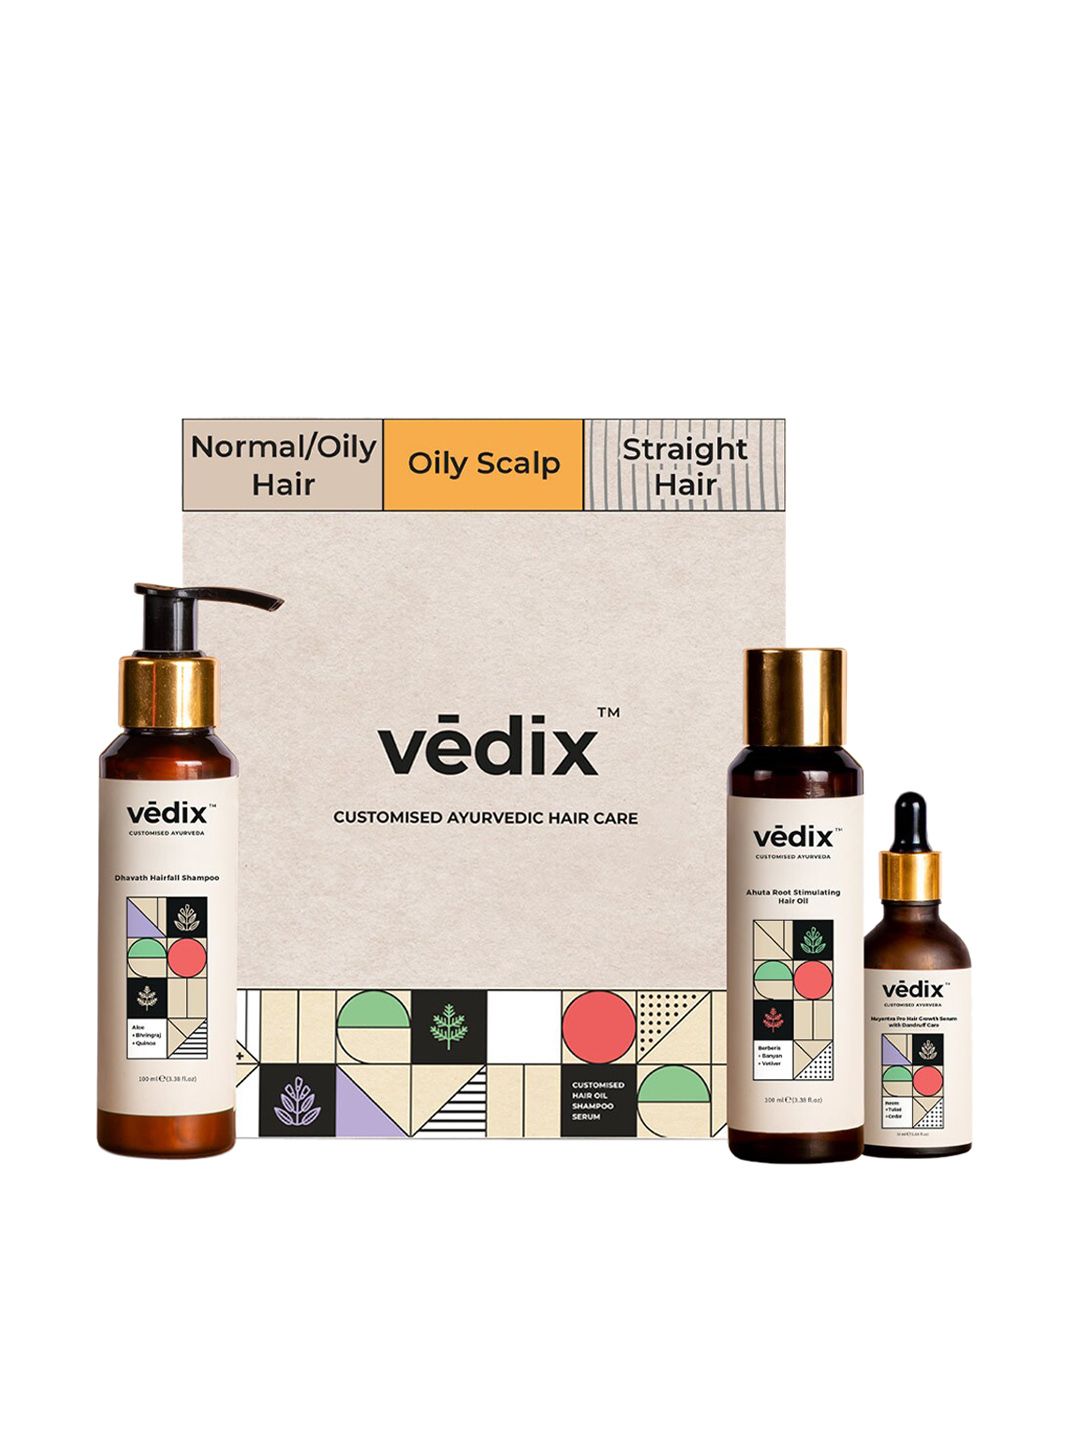 VEDIX Customized Hair Fall & Dandruff Control for Normal, Oily & Straight Hair Price in India